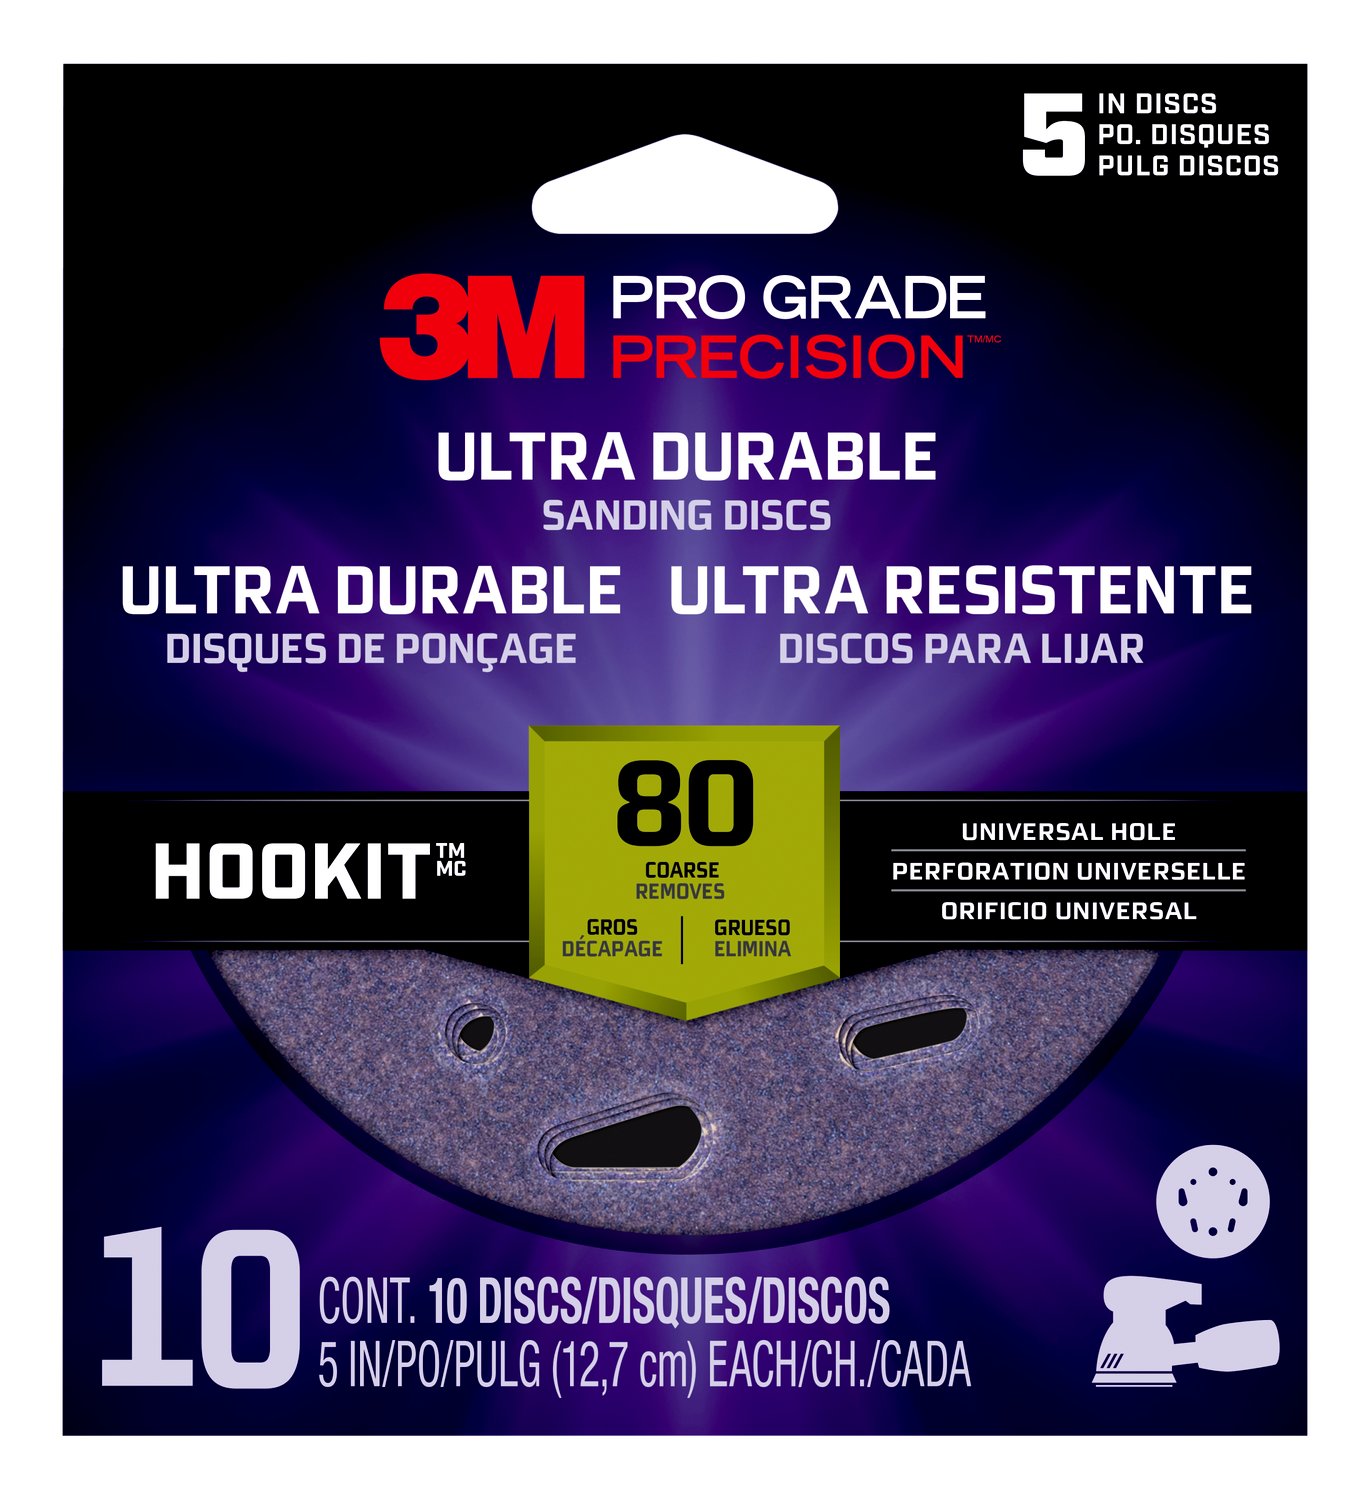 7100202914 - 3M Pro Grade Precision Ultra Durable Universal Hole Sanding Disc,
DUH580TRI-10T, 5 IN x UH, 80, 10 pack